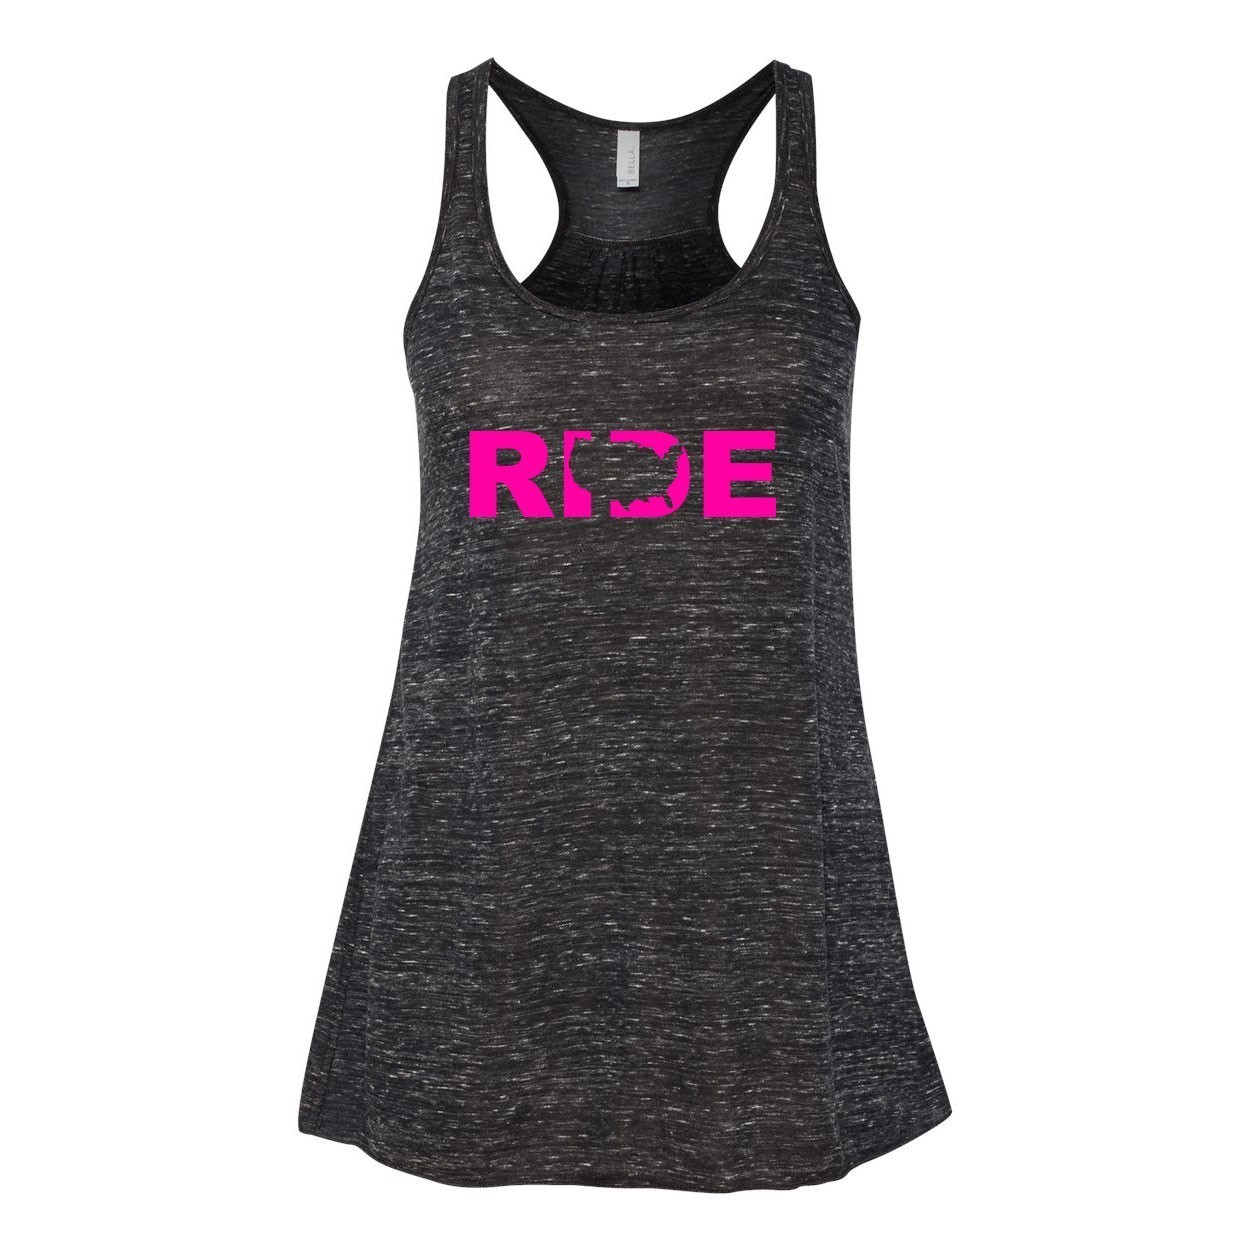 Ride United States Classic Women's Flowy Racerback Tank Top Black Marble (Pink Logo)